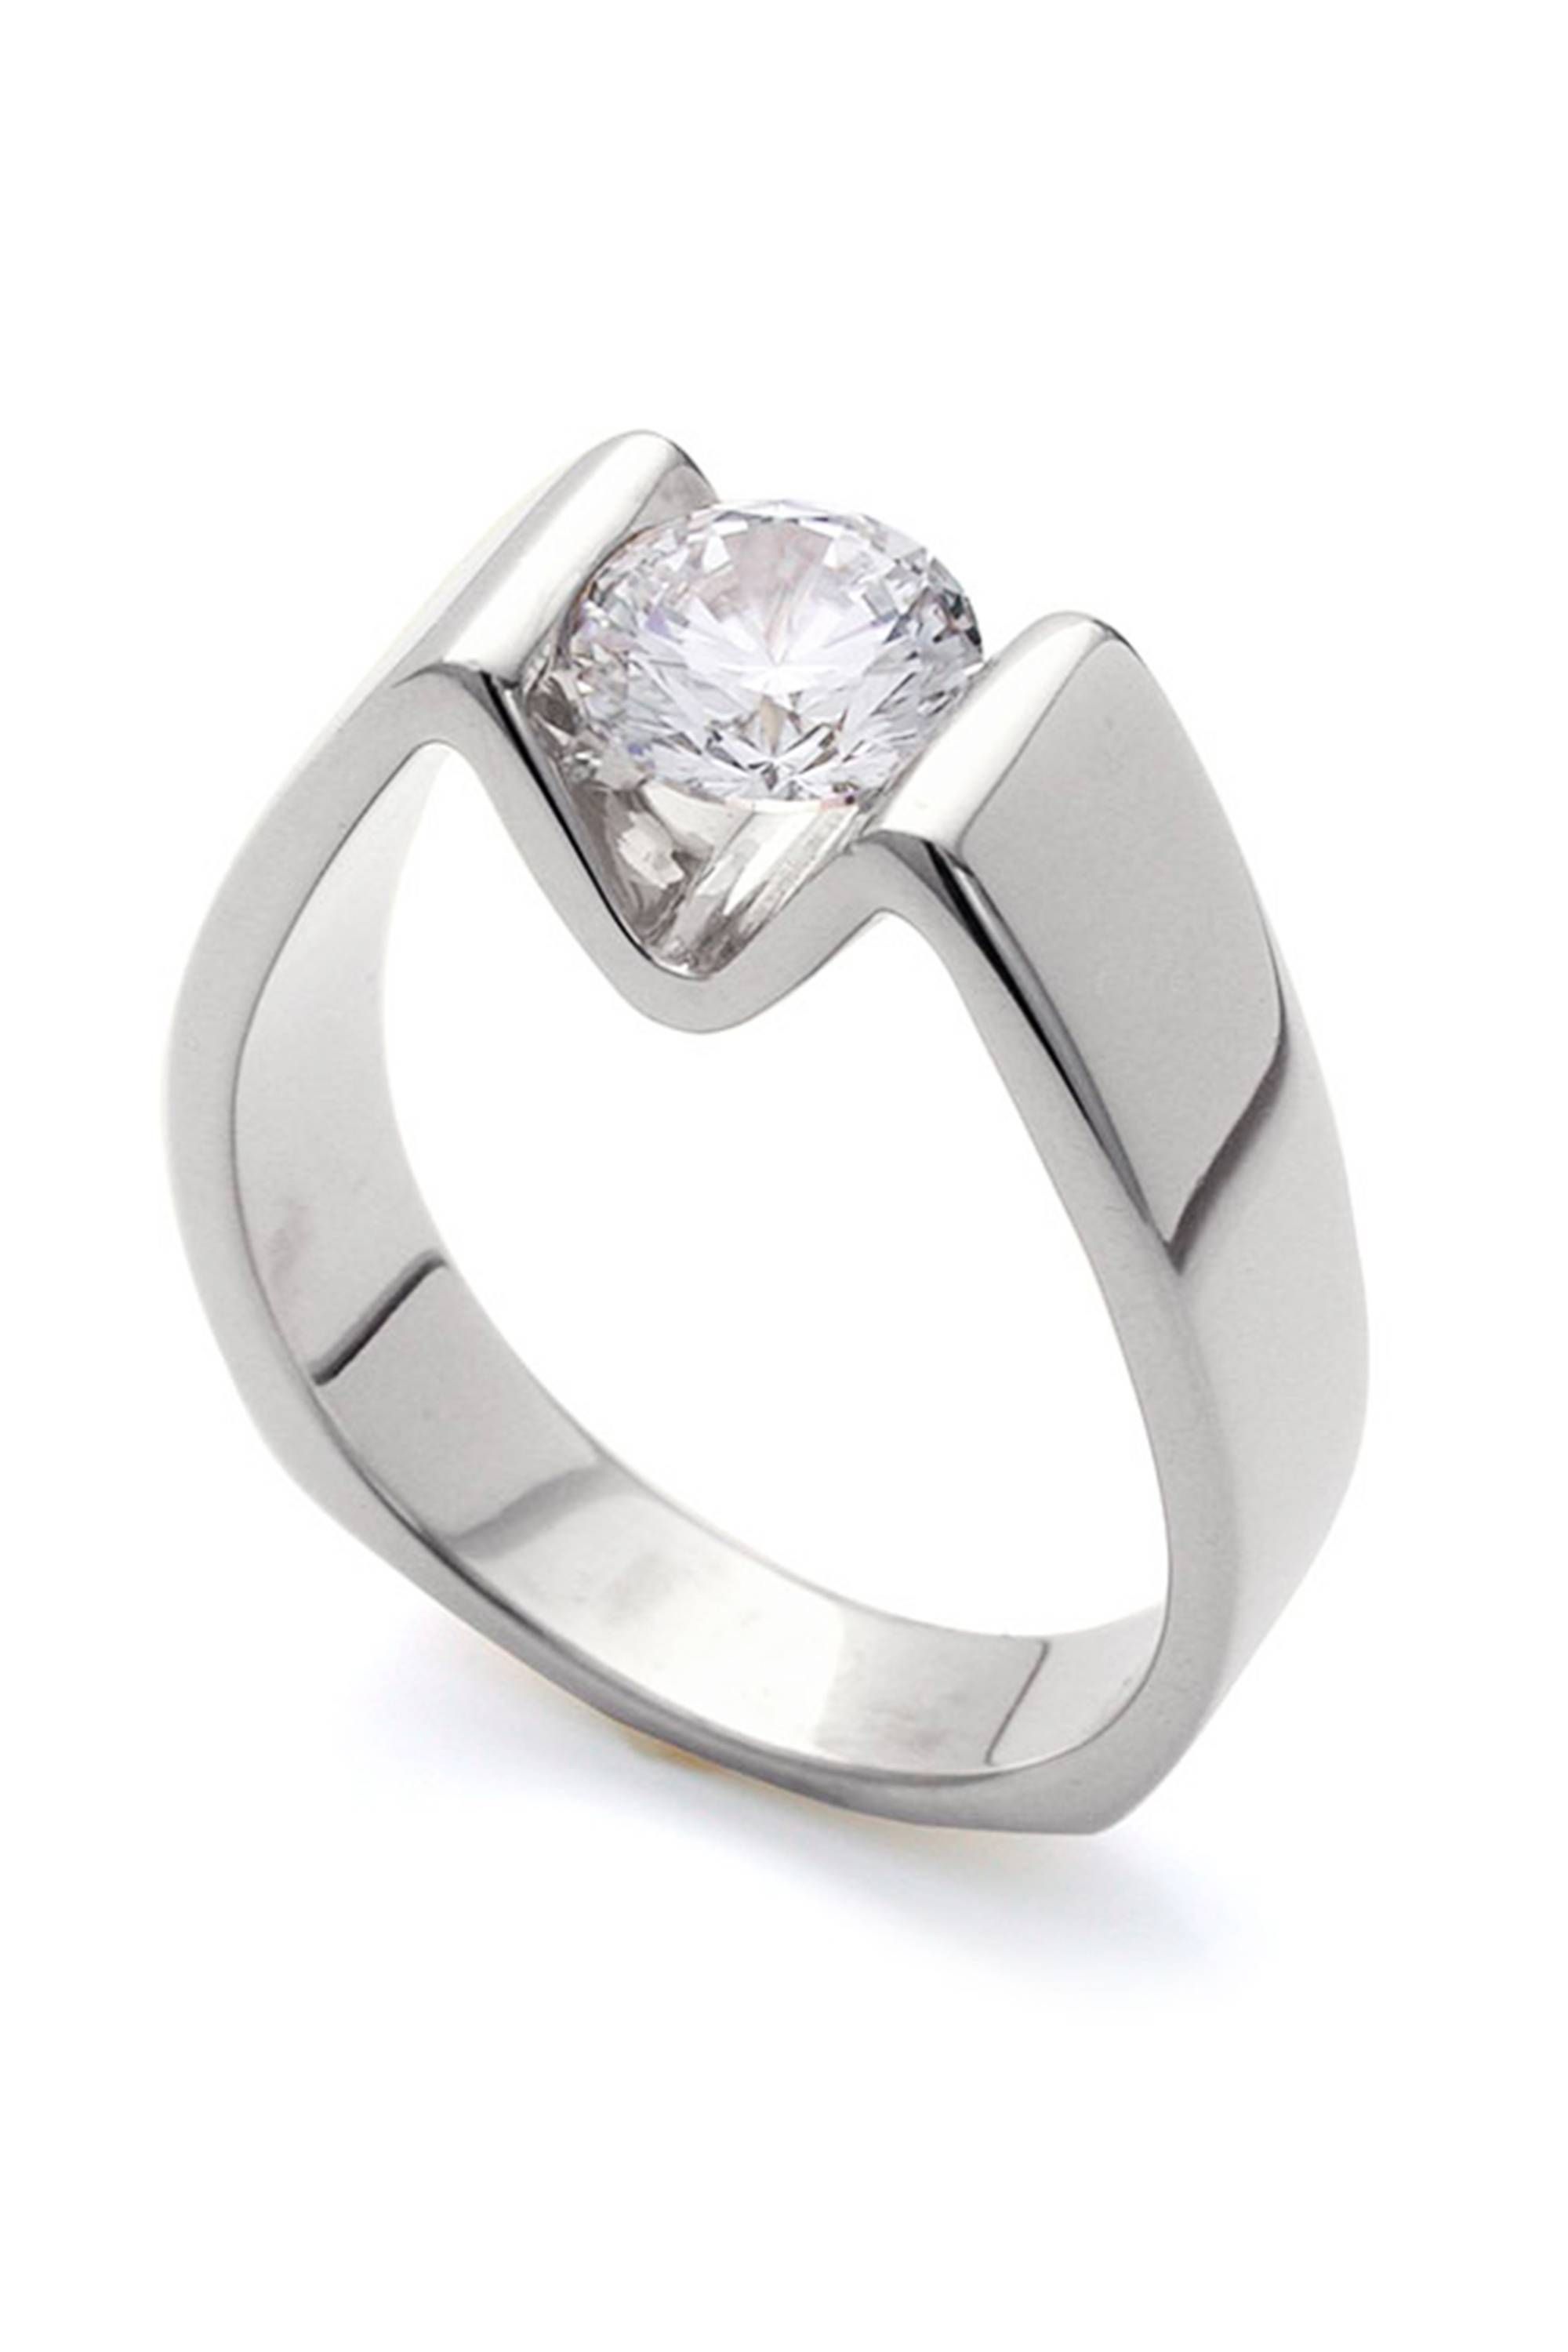 Engagement Rings : Cool Engagement Rings And Wedding Band Sets With Unusual Diamond Wedding Bands (View 10 of 15)